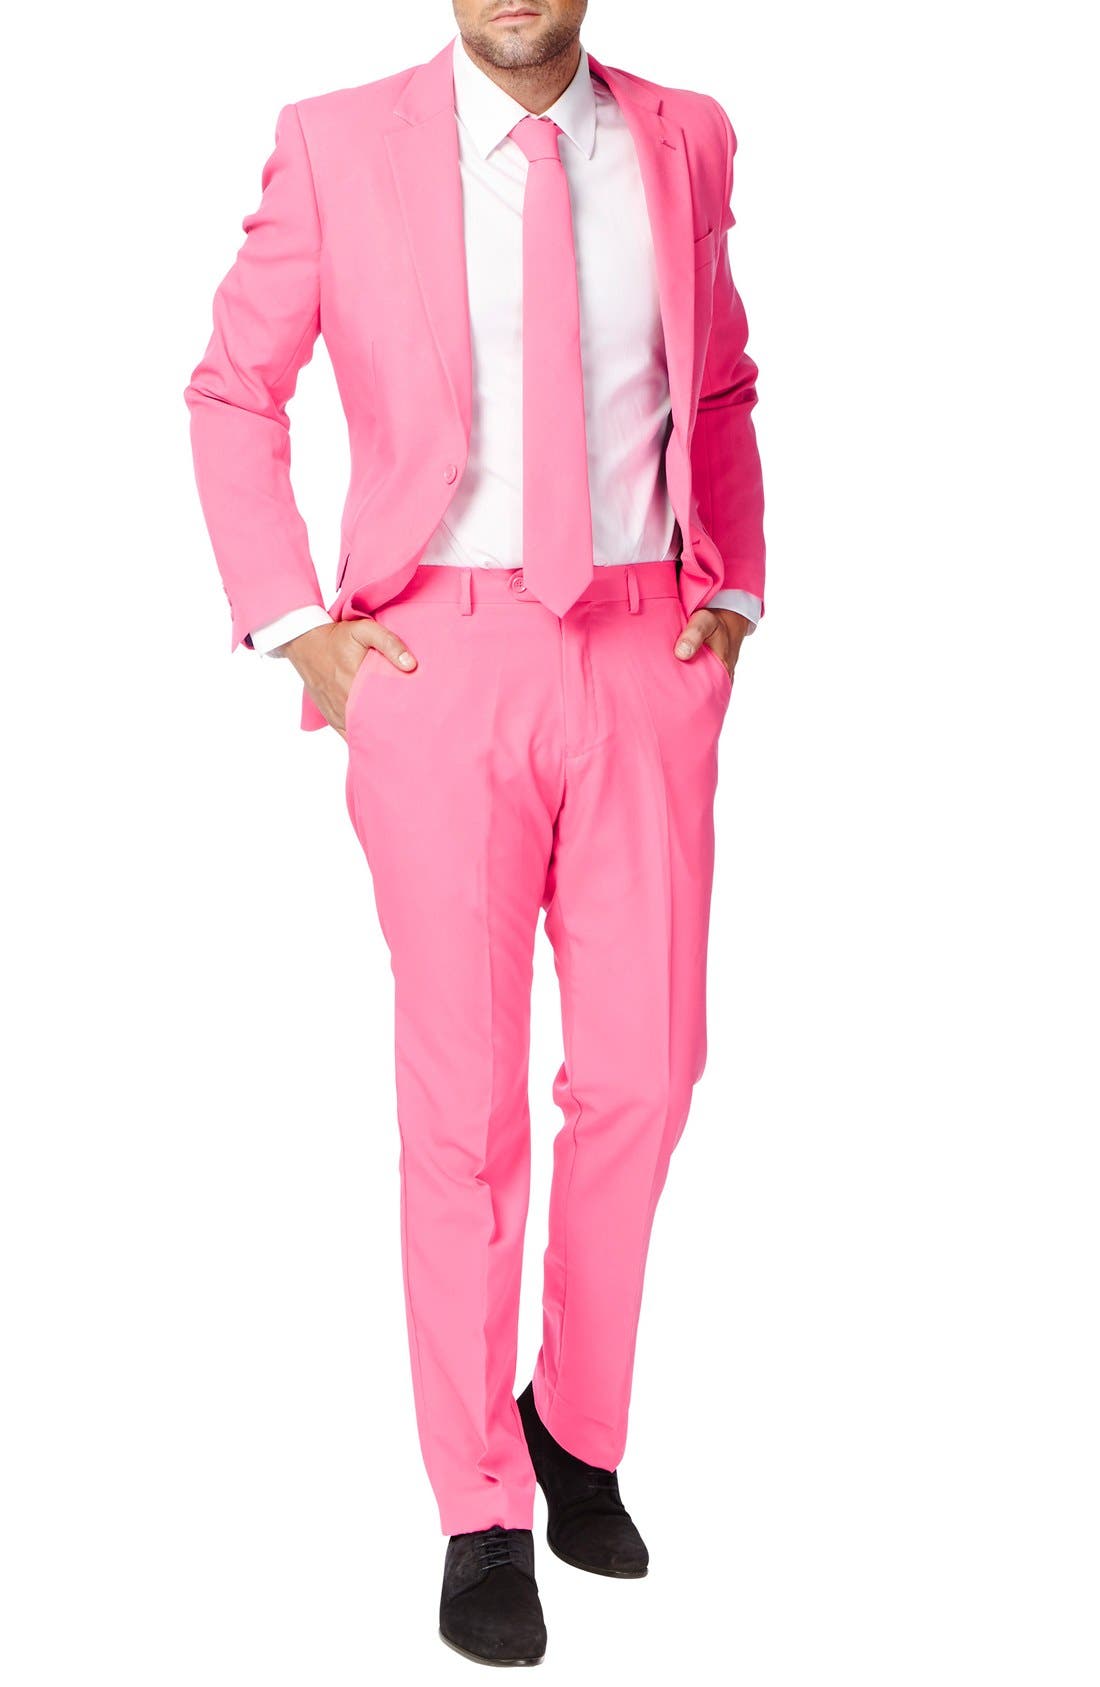 Includes Pants Jacket And Tie Abito da uomo Uomo OppoSuits Solid Color Party Suits For Men Mr Pink Full Suit